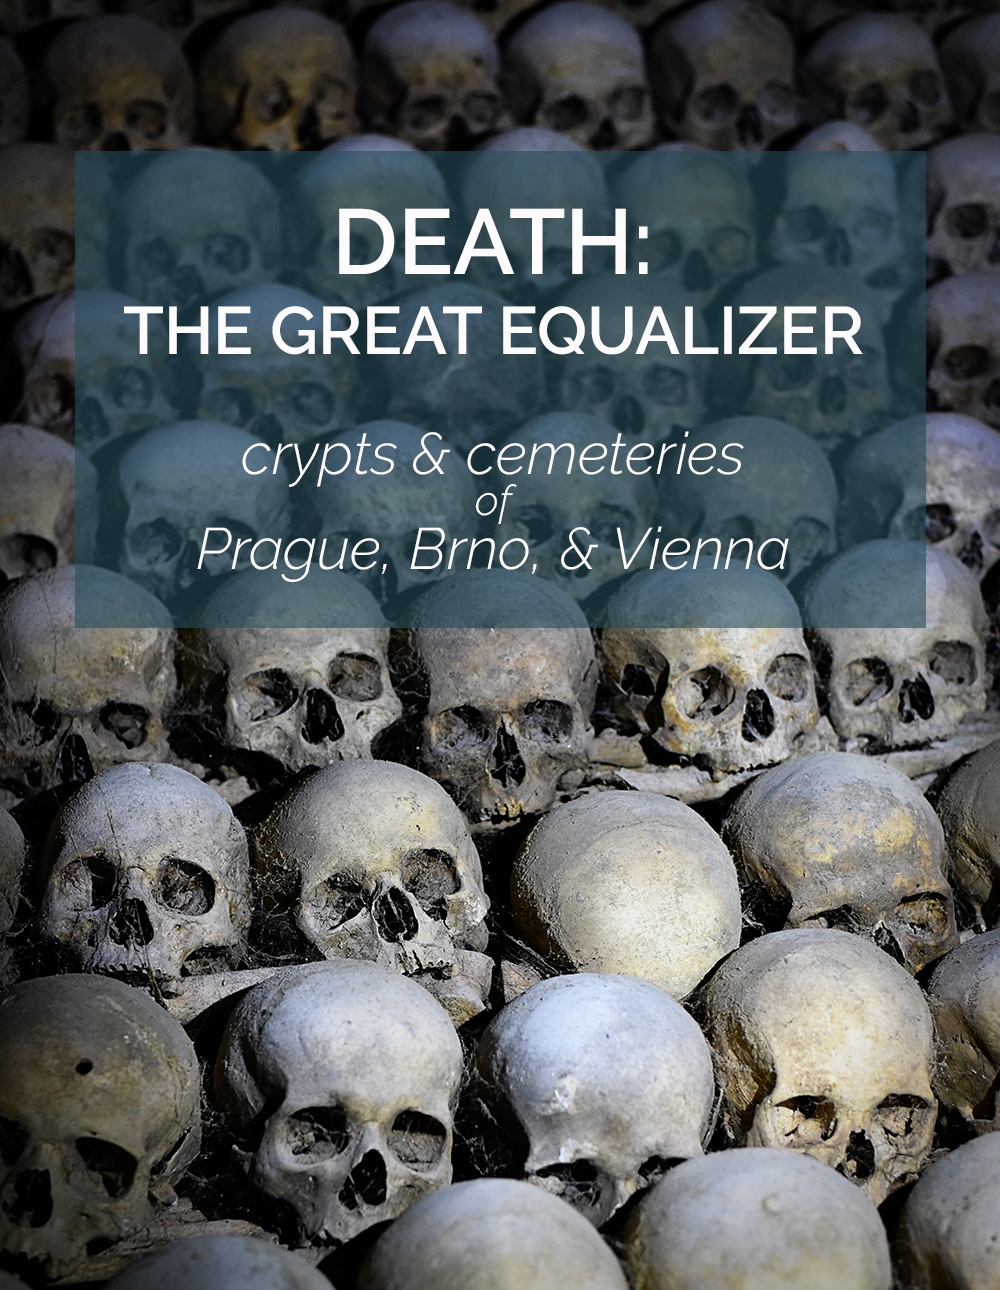 Death, the Great Equalizer (crypts & cemeteries of Prague, Brno, & Vienna)